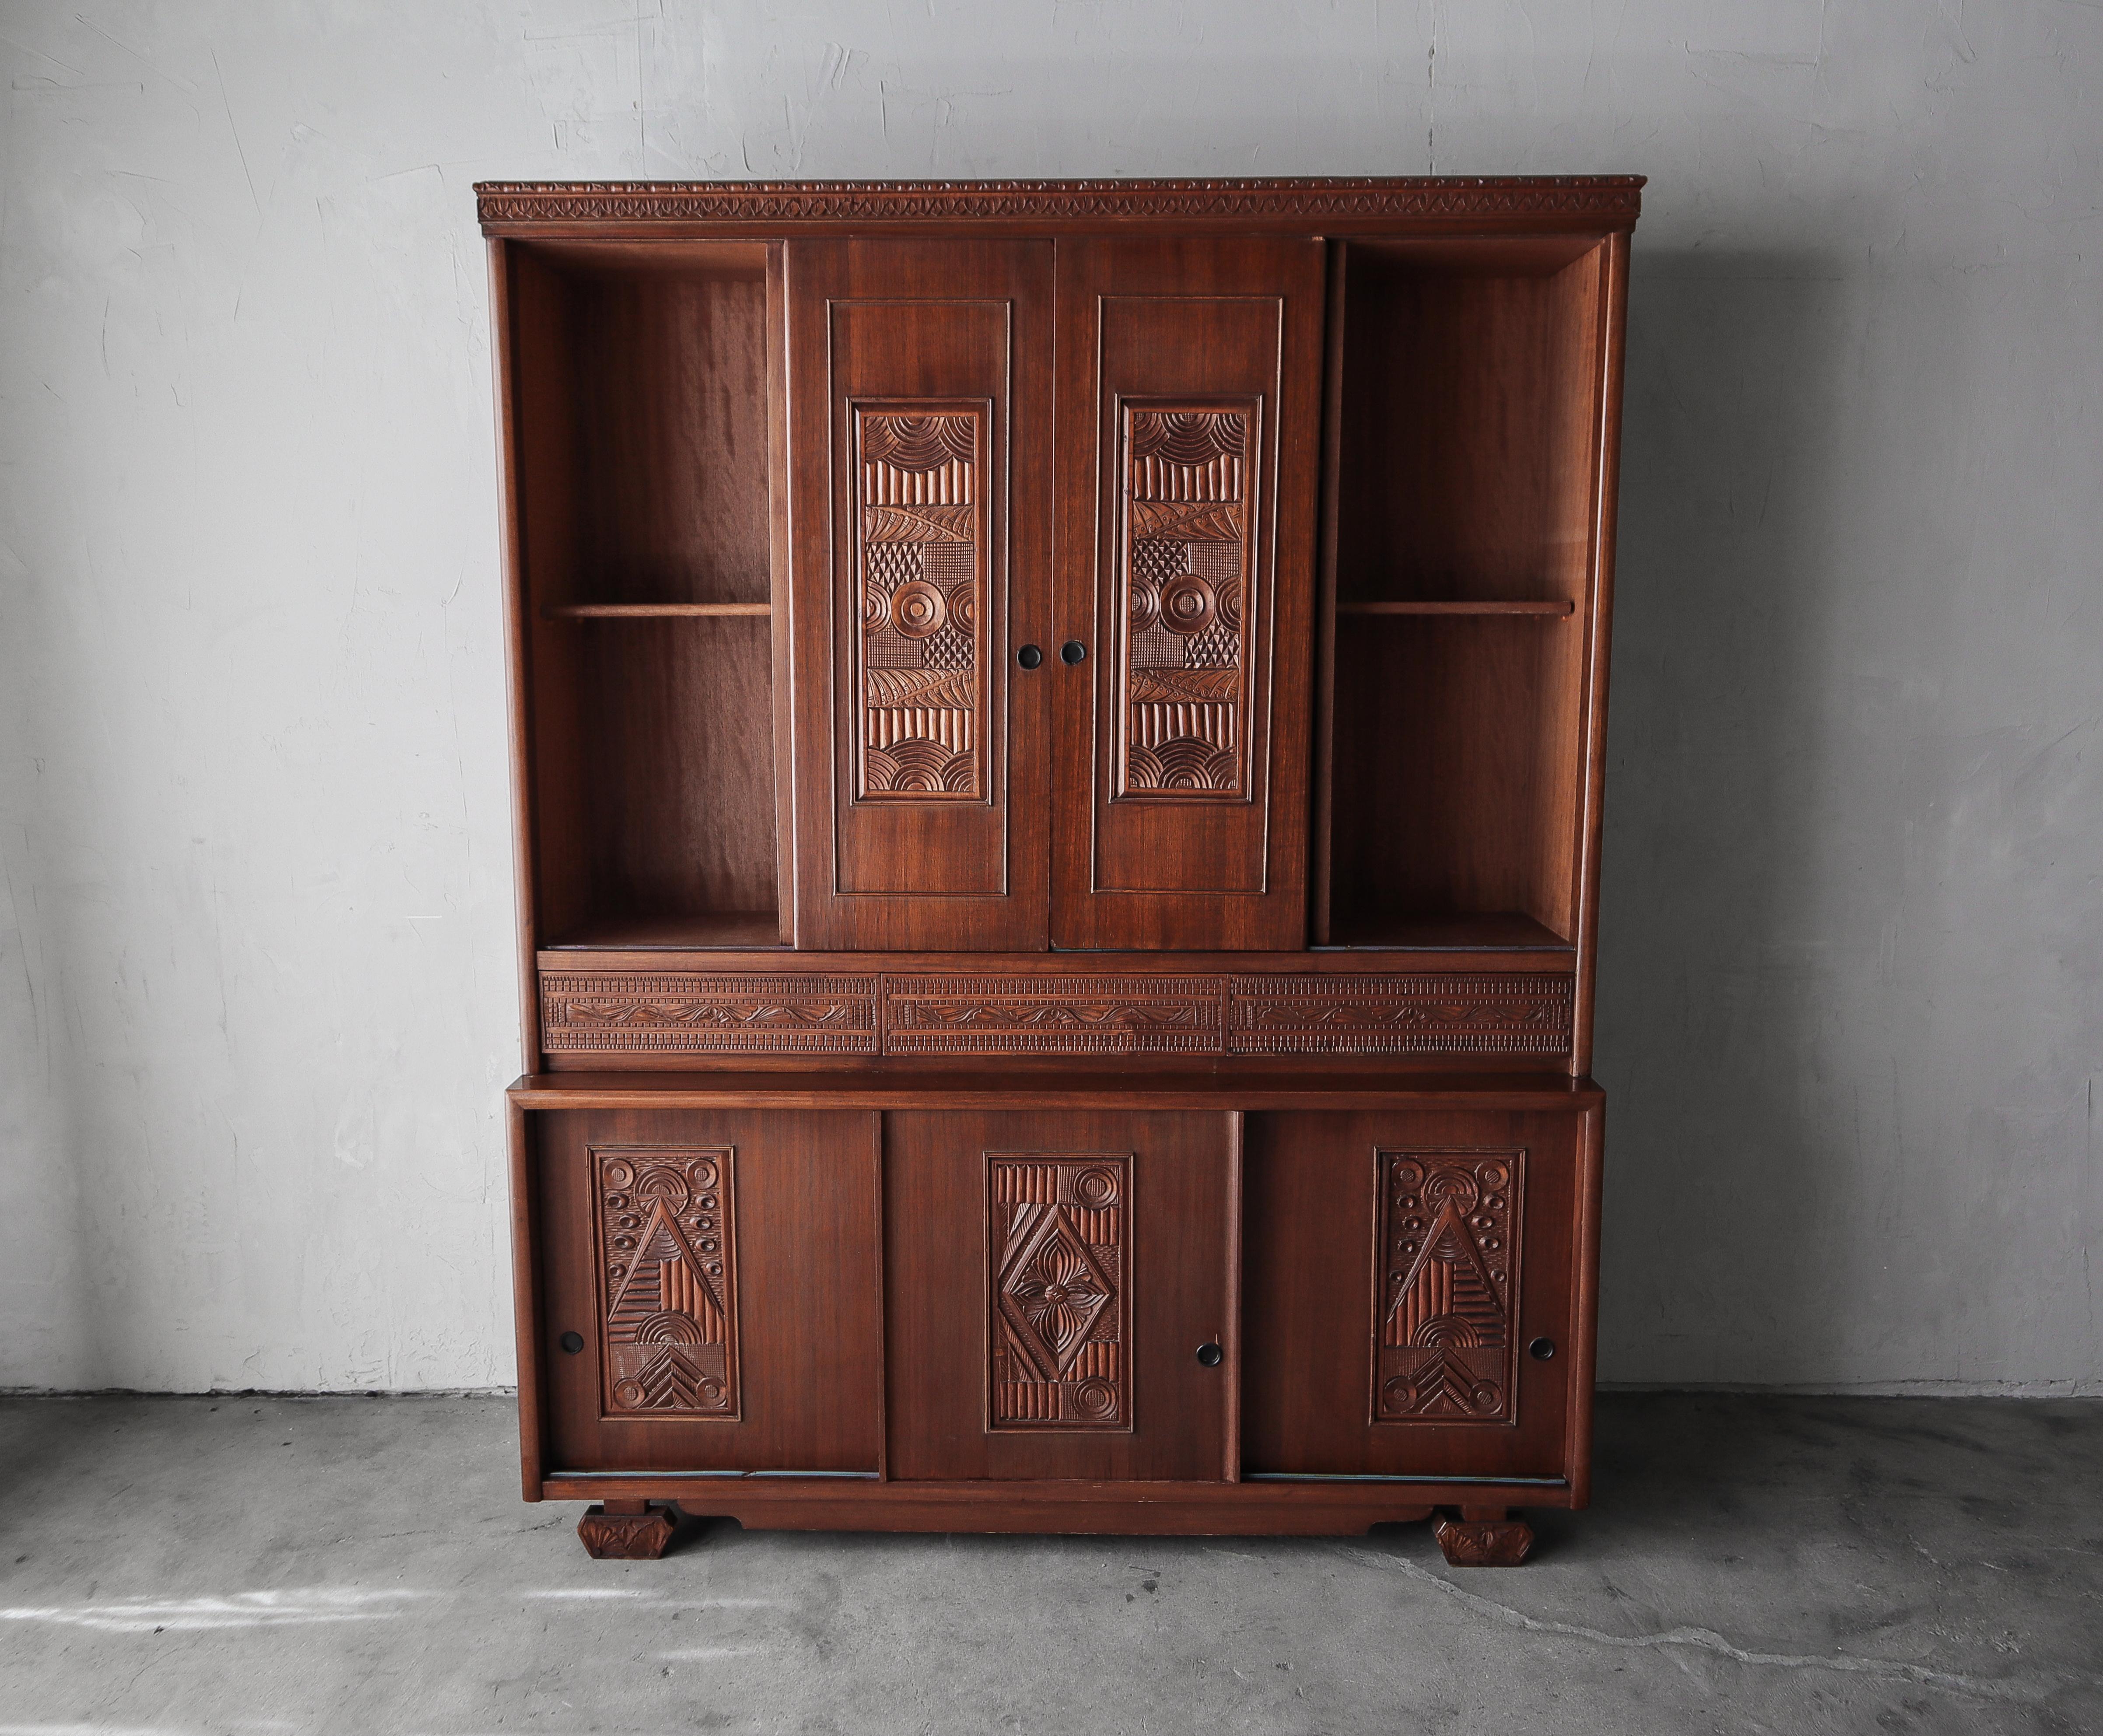 This antique, carved wood cabinet is truly unique.  So unique I have been unable to find another example of any kind.  Everything from the legs and trim, to the doors and drawer fronts are carved in the most unique, intricate and gorgeous manner.  A